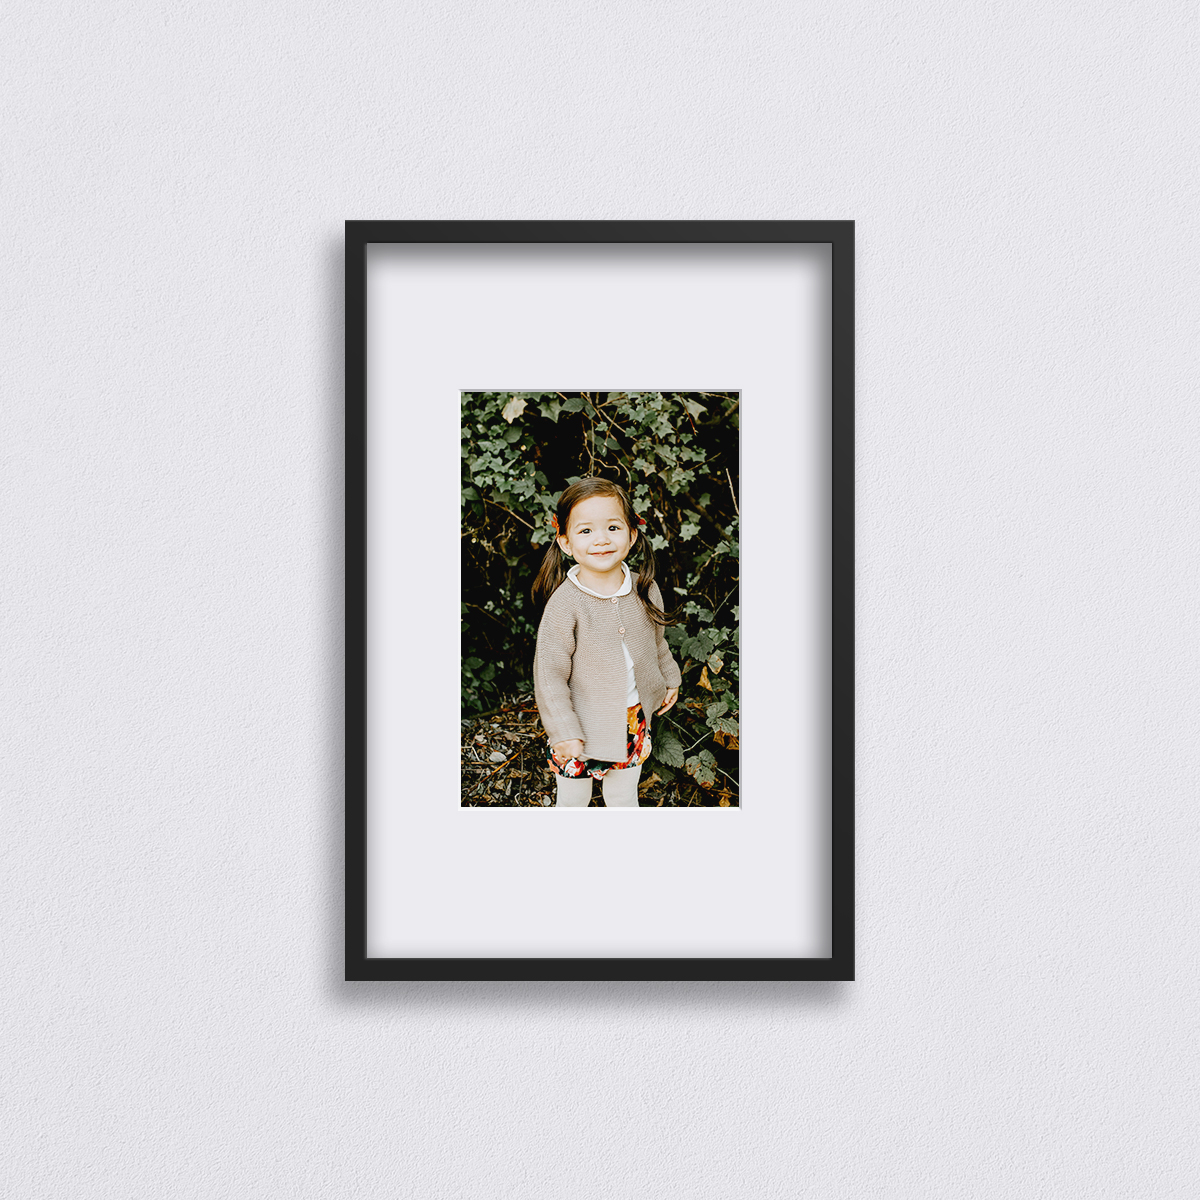 20 x 30 inch Artifact Uprising Deep Set Frame in Black finish matted to 12 x 18 inch featuring portrait of pig-tailed little girl in cardigan standing in front of background of green foliage